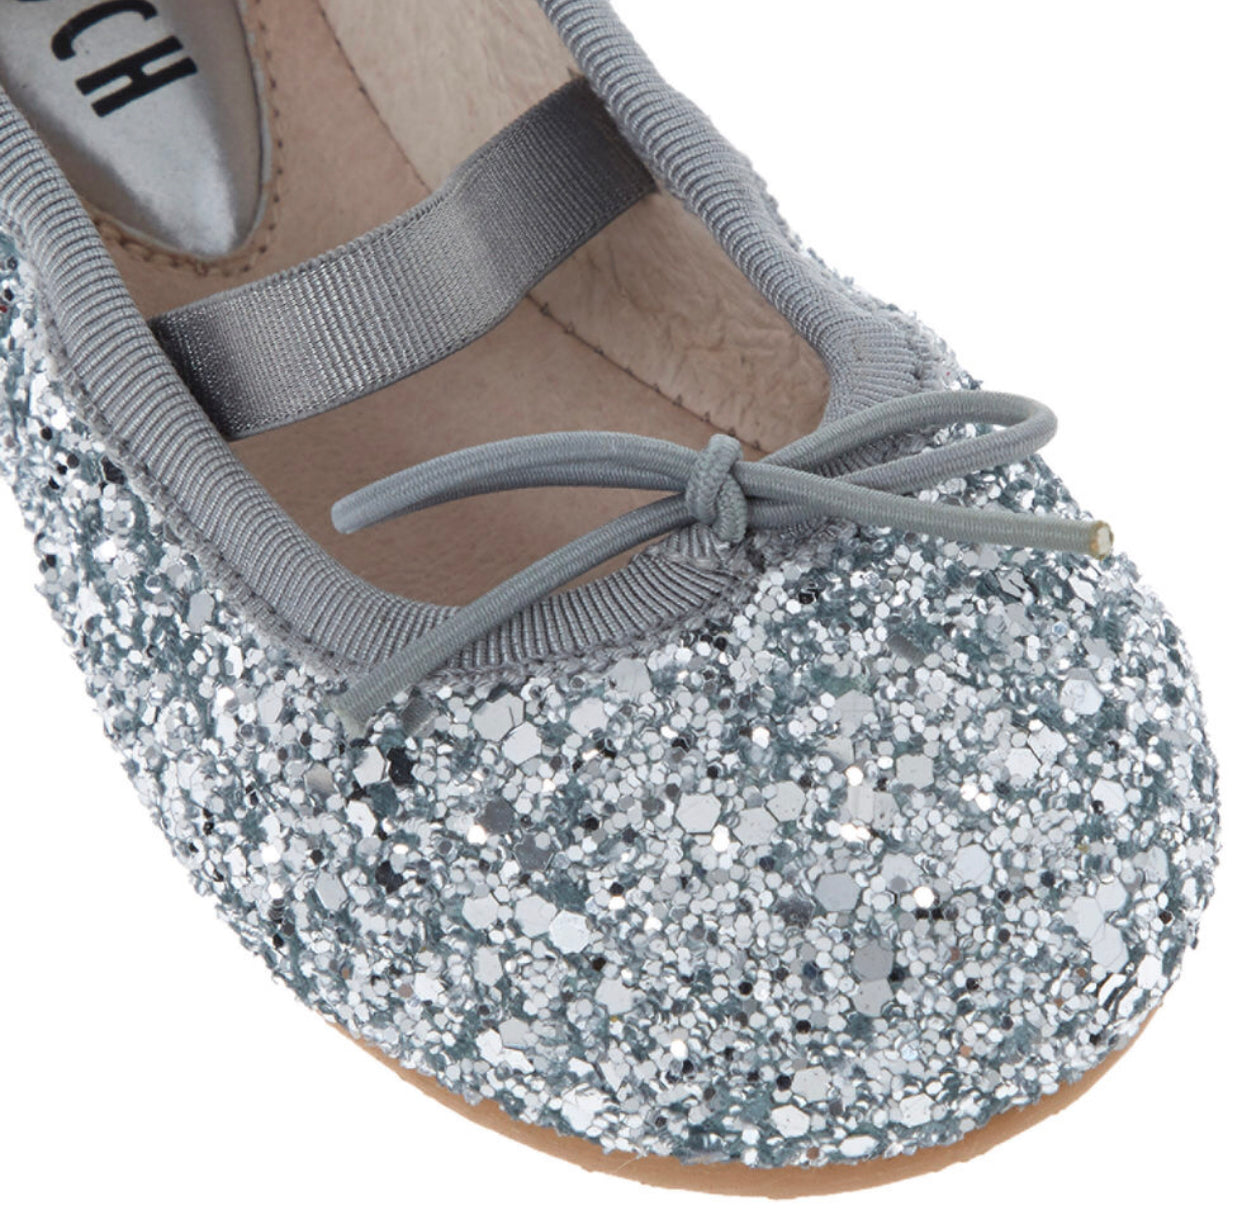 Bloch Silver Sparkly Party Shoes